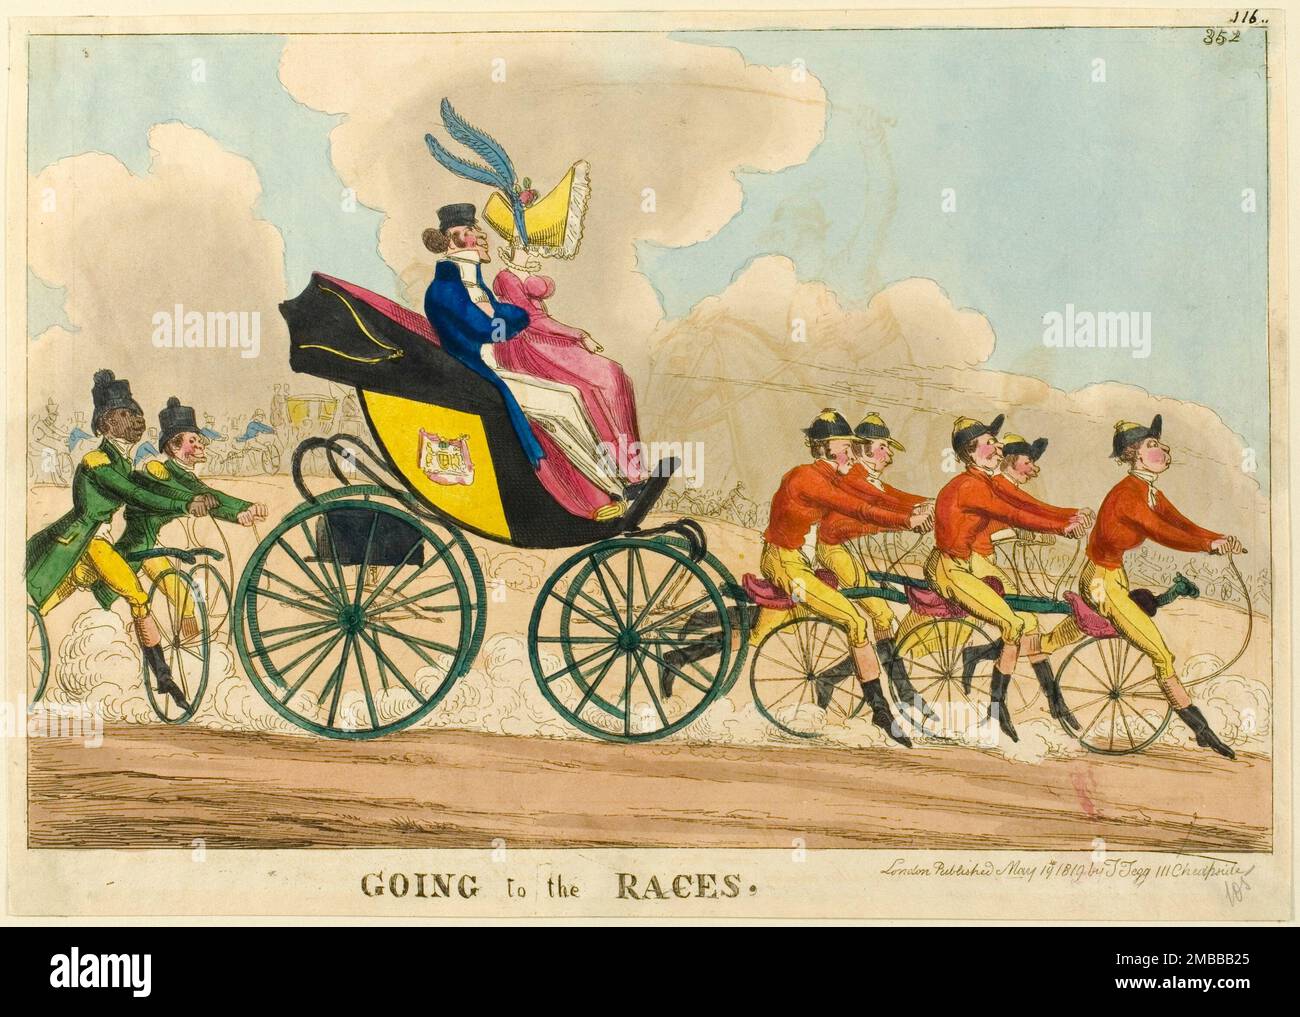 Going to the Races, published May 14, 1819. Carriage pulled by men riding  hobby horses, a forerunner of the bicycle lacking pedals and brakes. Attributed to William Heath. Stock Photo